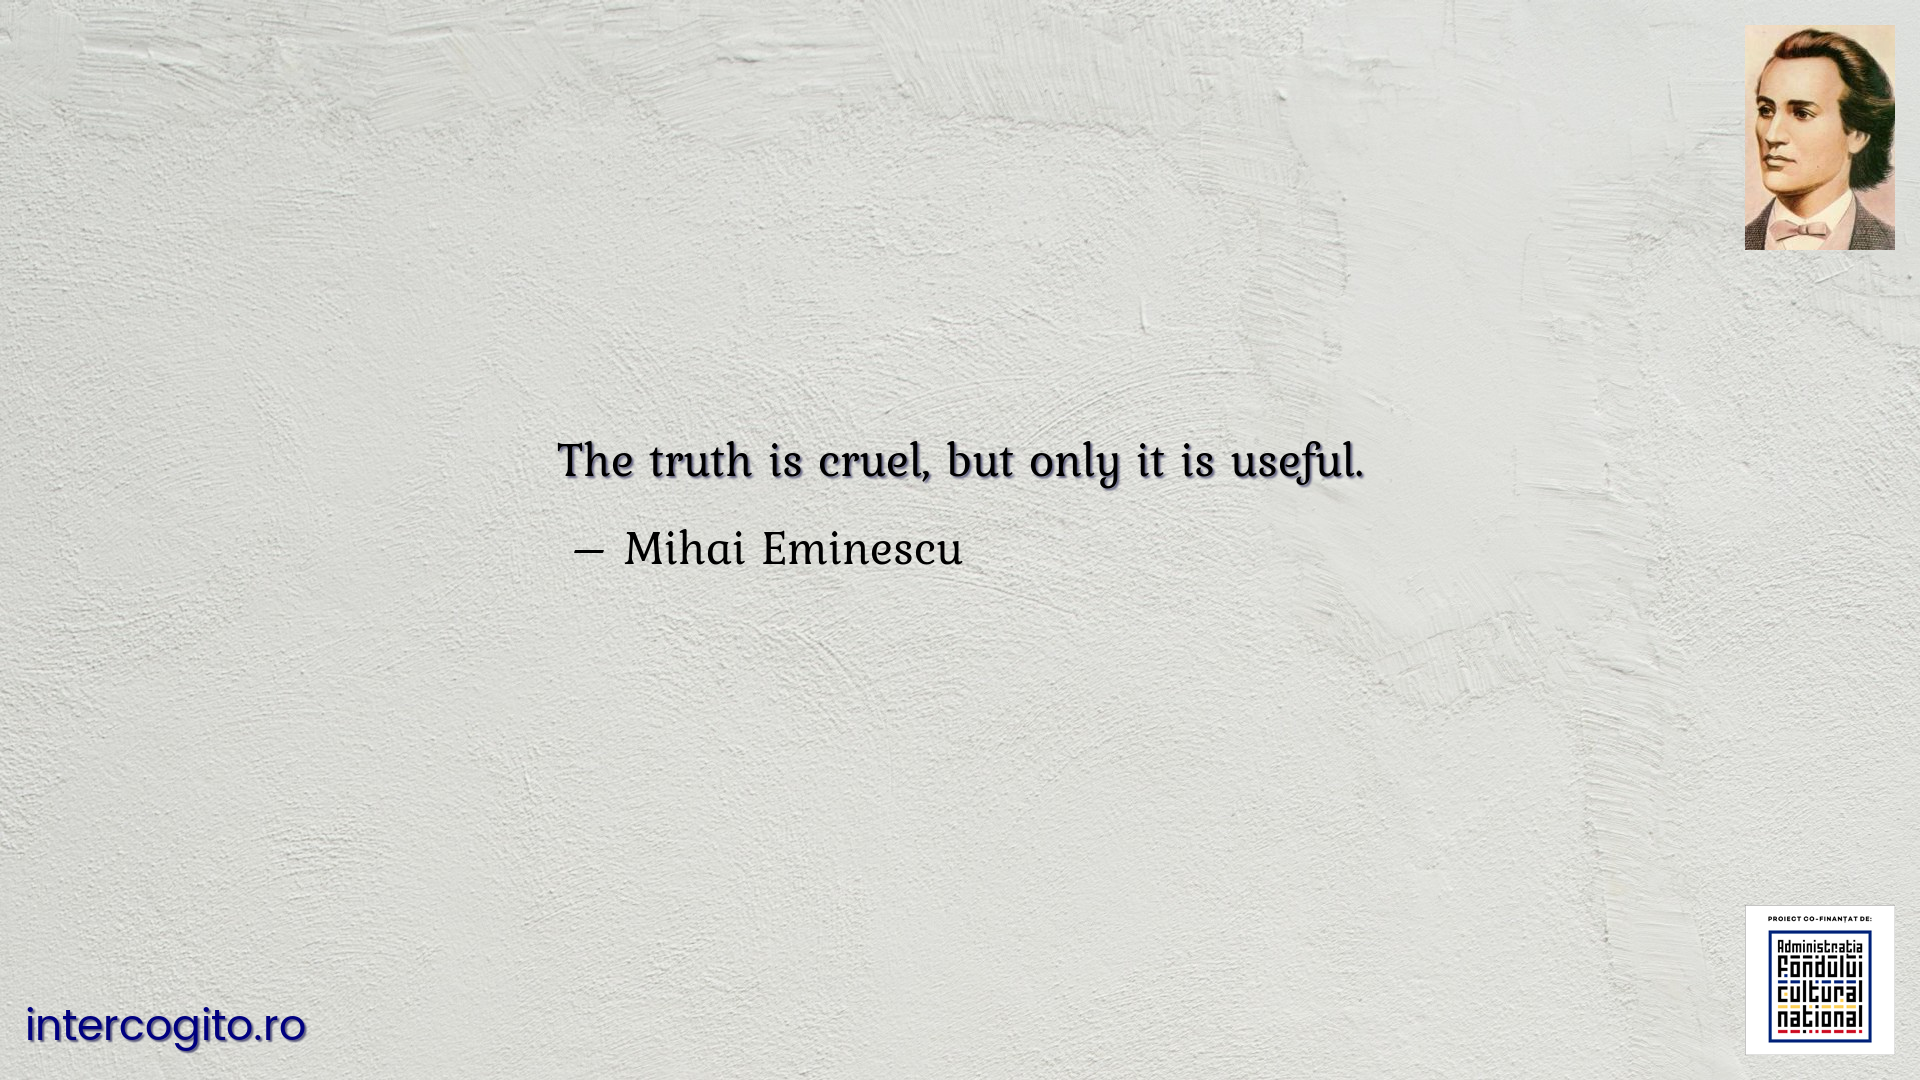 The truth is cruel, but only it is useful.